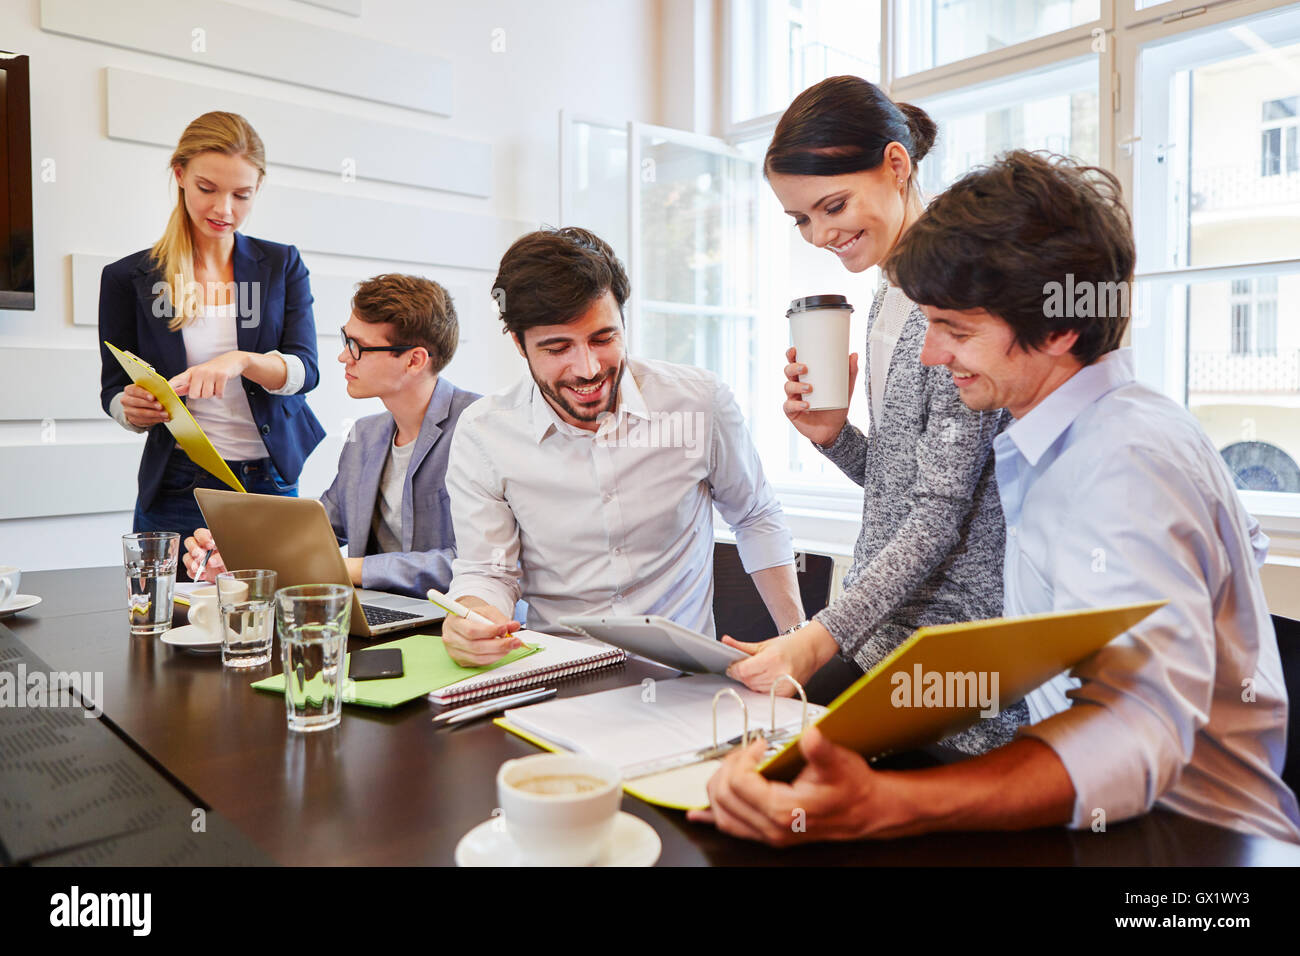 Start-up team discussing and cooperating in business meeting Stock Photo